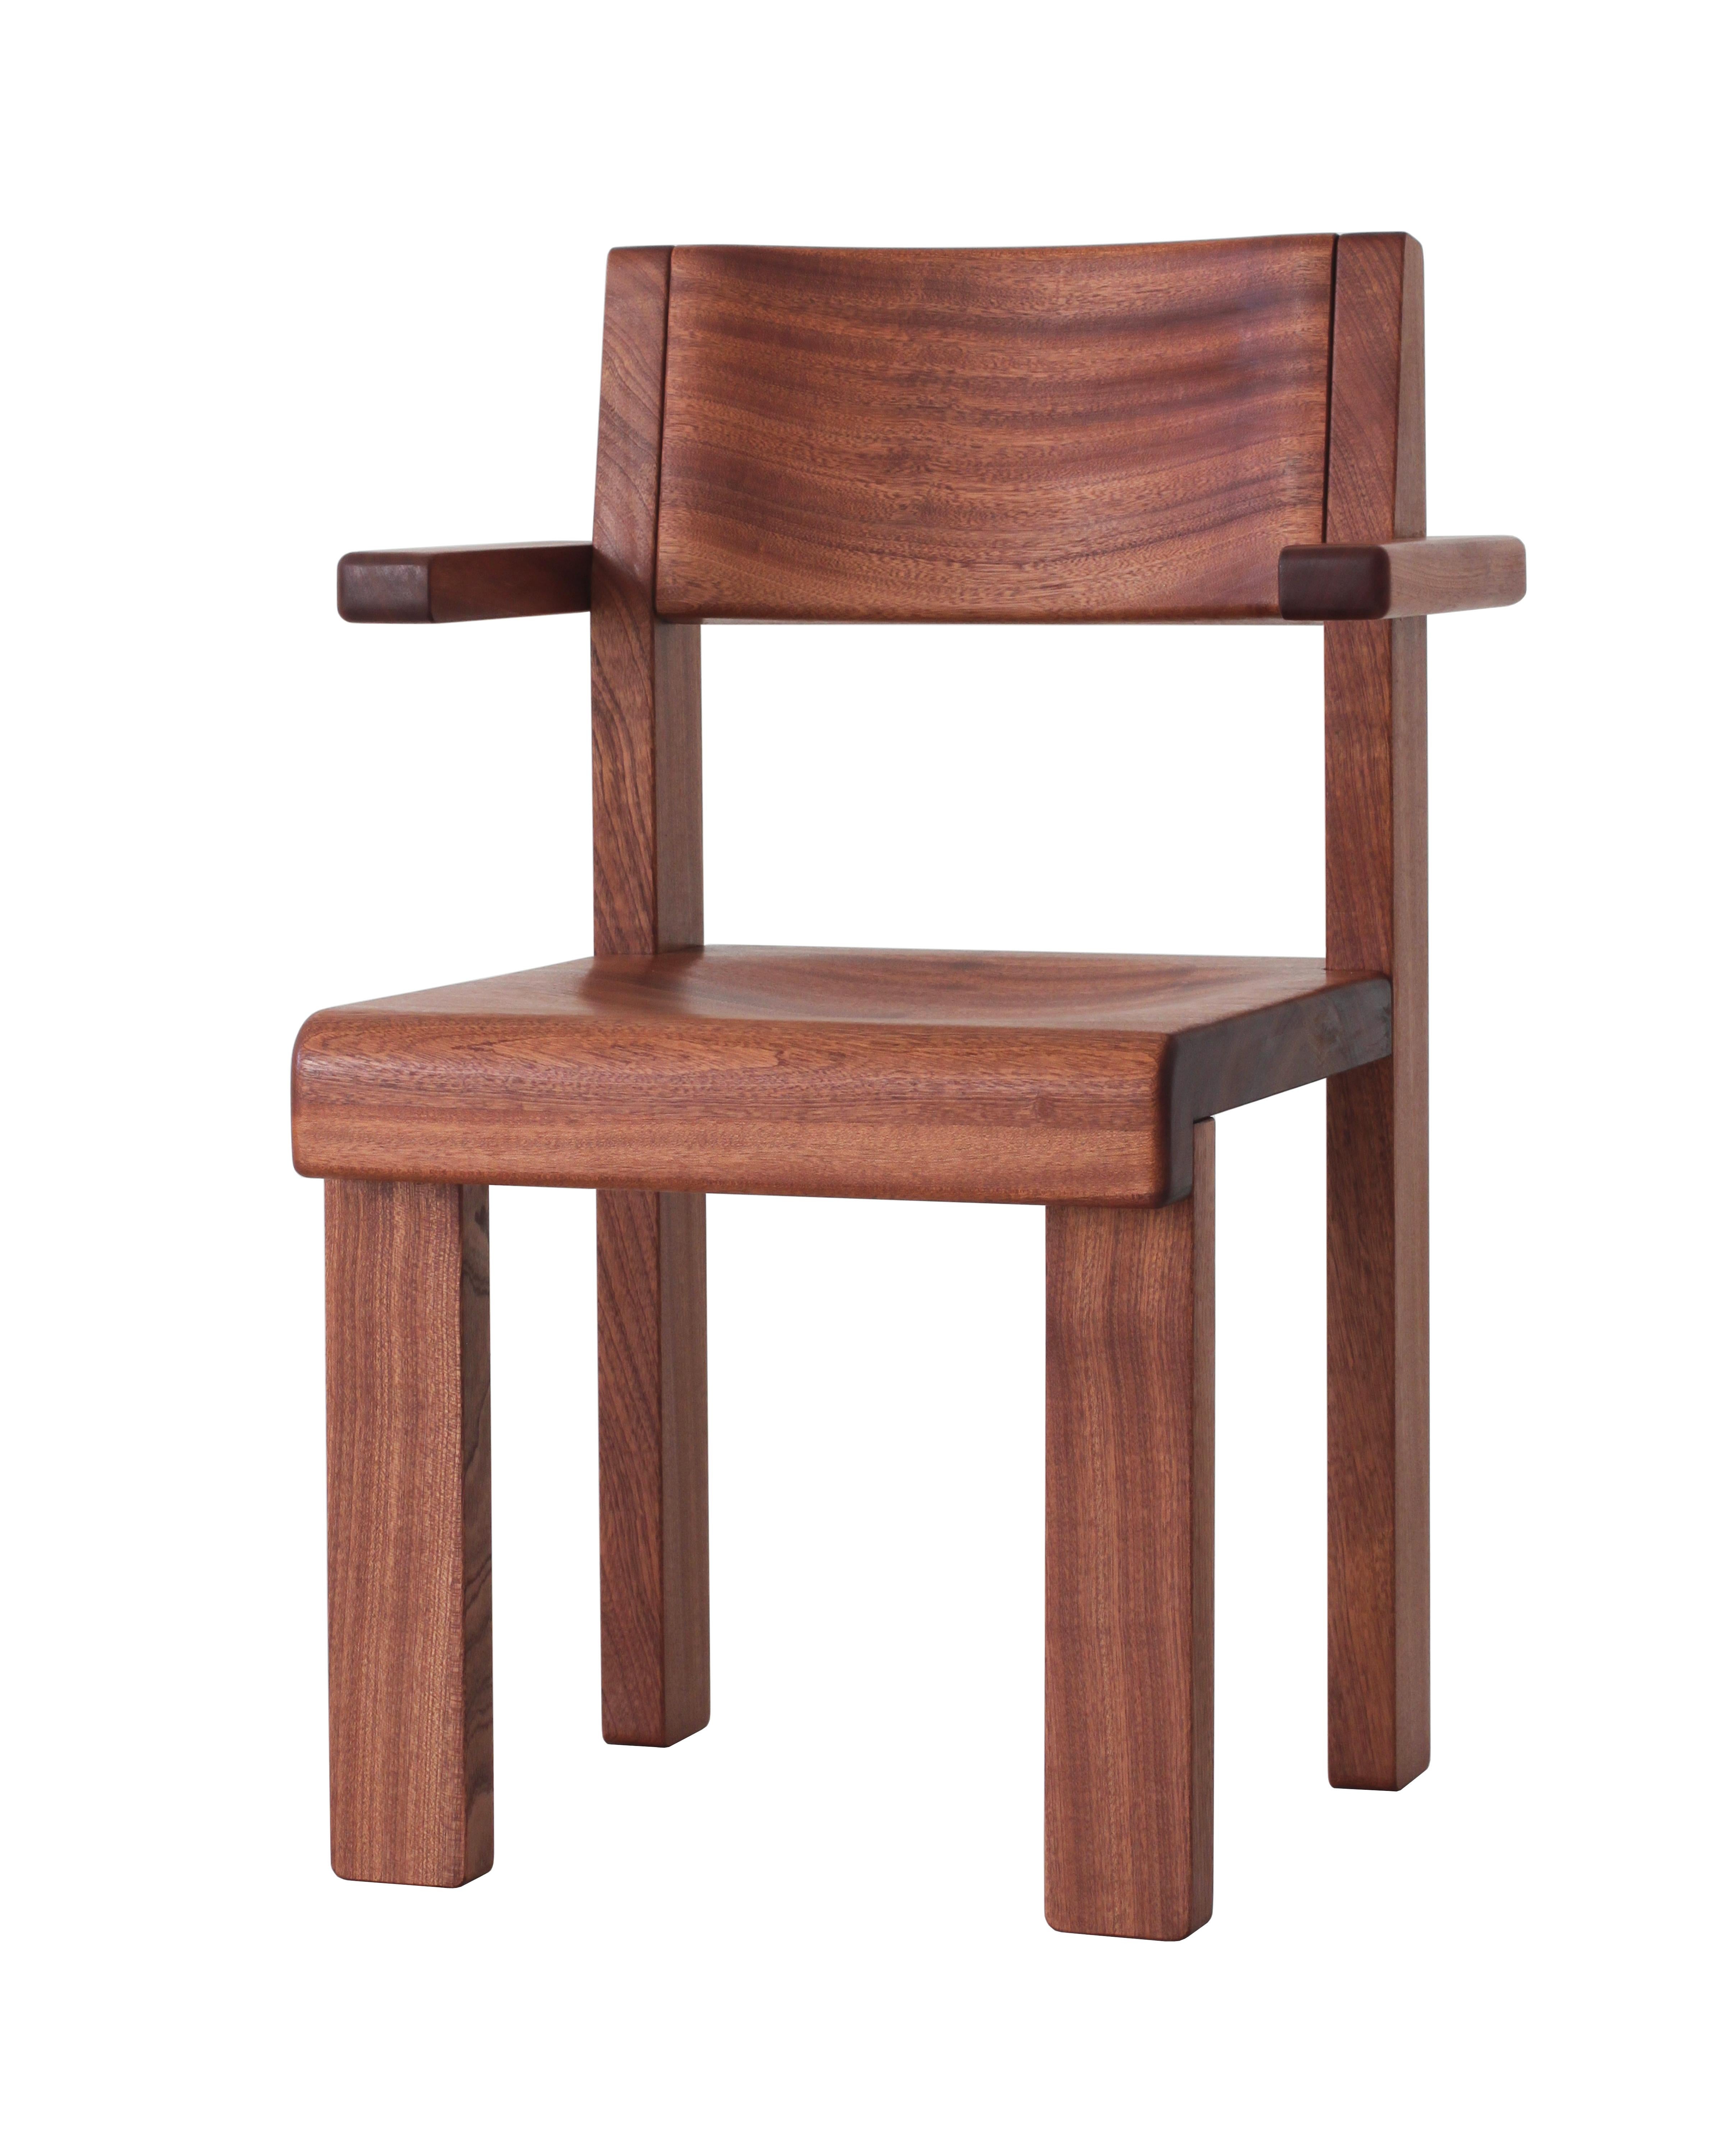 Oliver armchair is made of solid sapele wood with a hand-rubbed oil finish. The design is robust yet simple, with clean lines and soft edges. Thick legs enable sturdy connections, limiting the number of parts needed, and the front and back legs are